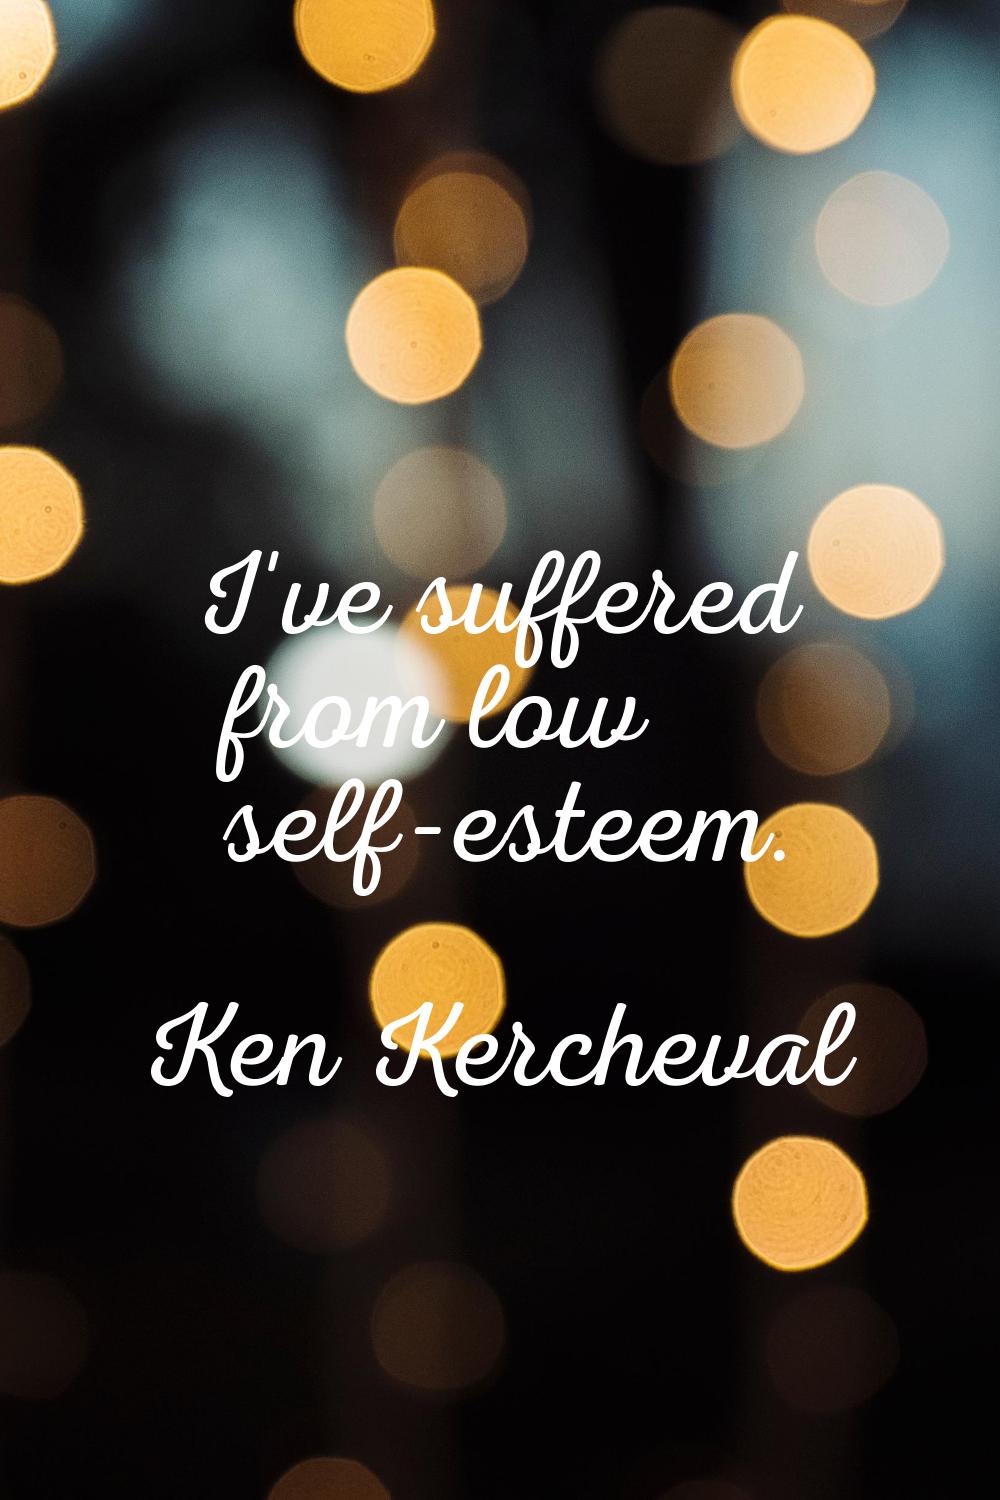 I've suffered from low self-esteem.